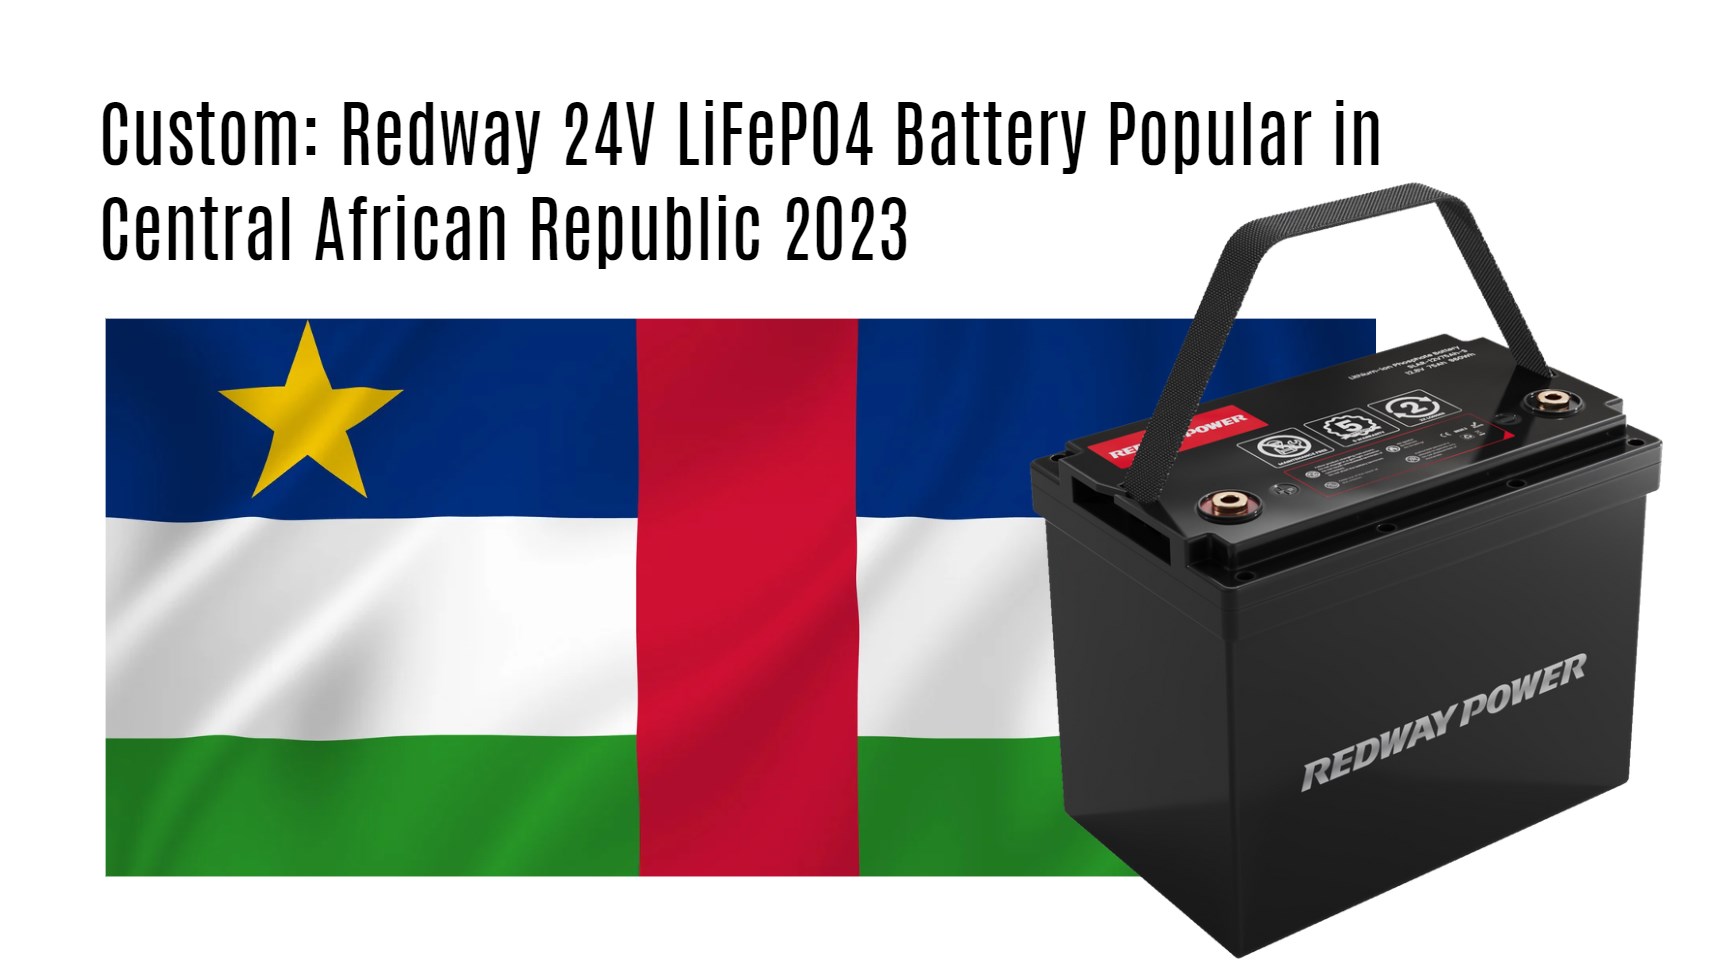 Custom: Redway 24V LiFePO4 Battery Popular in Central African Republic 2023